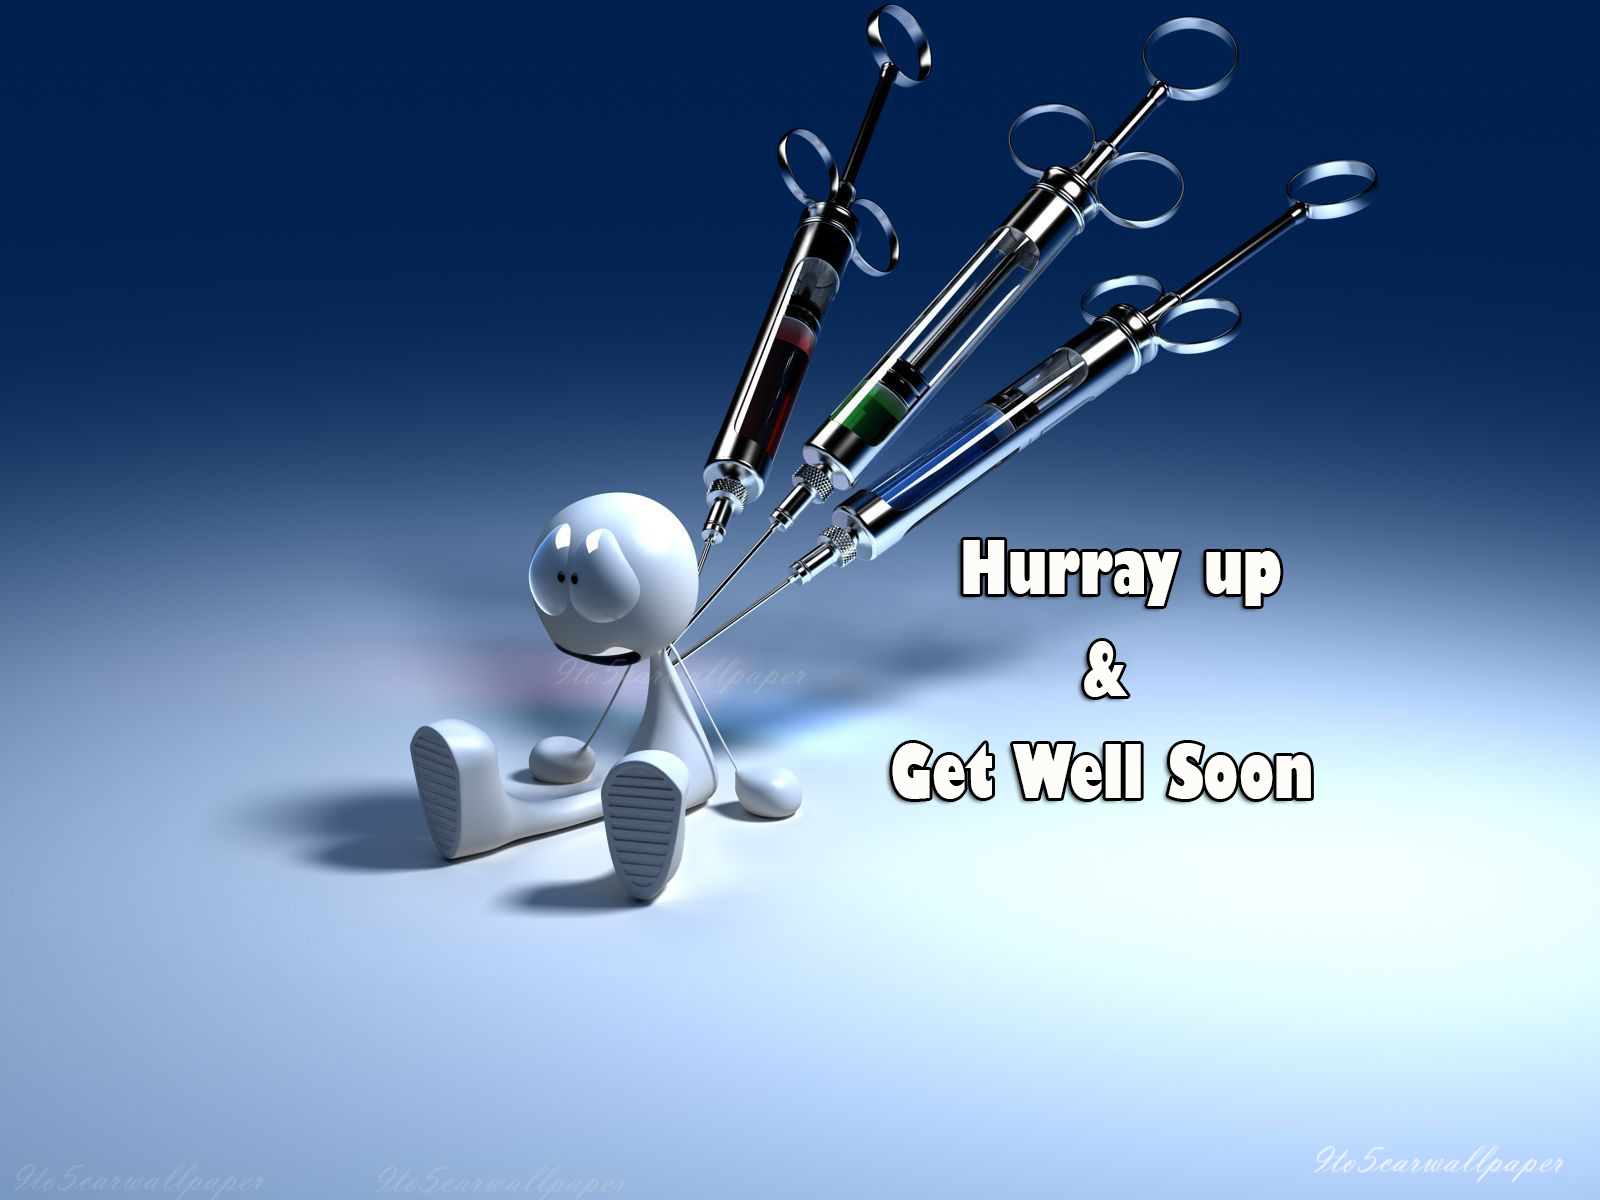 Get Well Soon Inspirational Quotes-Wishes